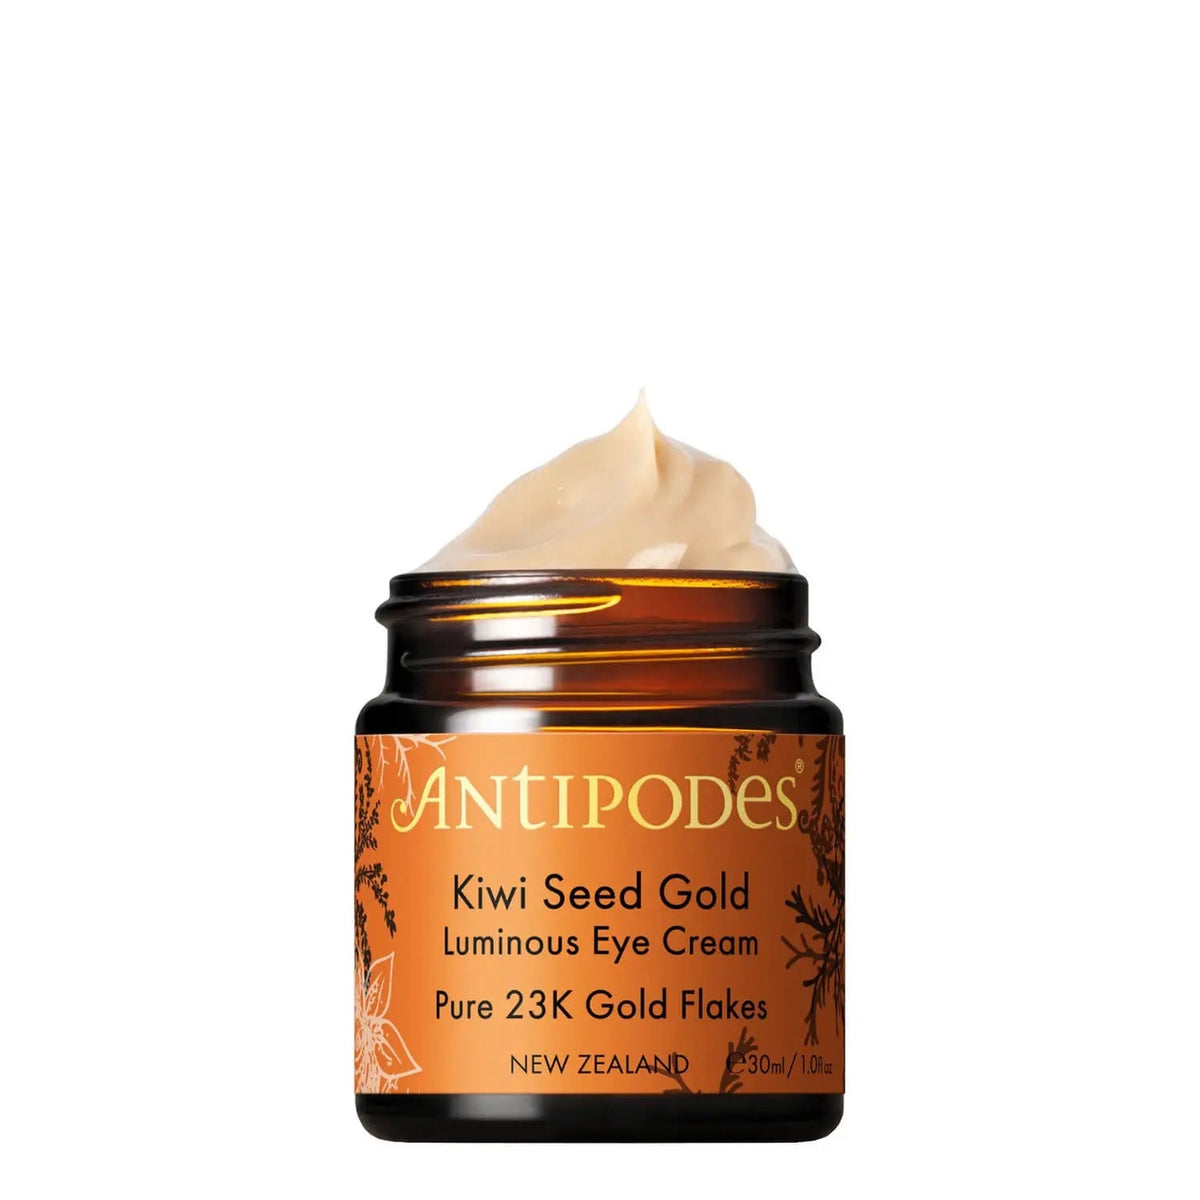 Antipodes Kiwi Seed Gold Luminous Eye Cream - ProCare Outlet by Antipodes